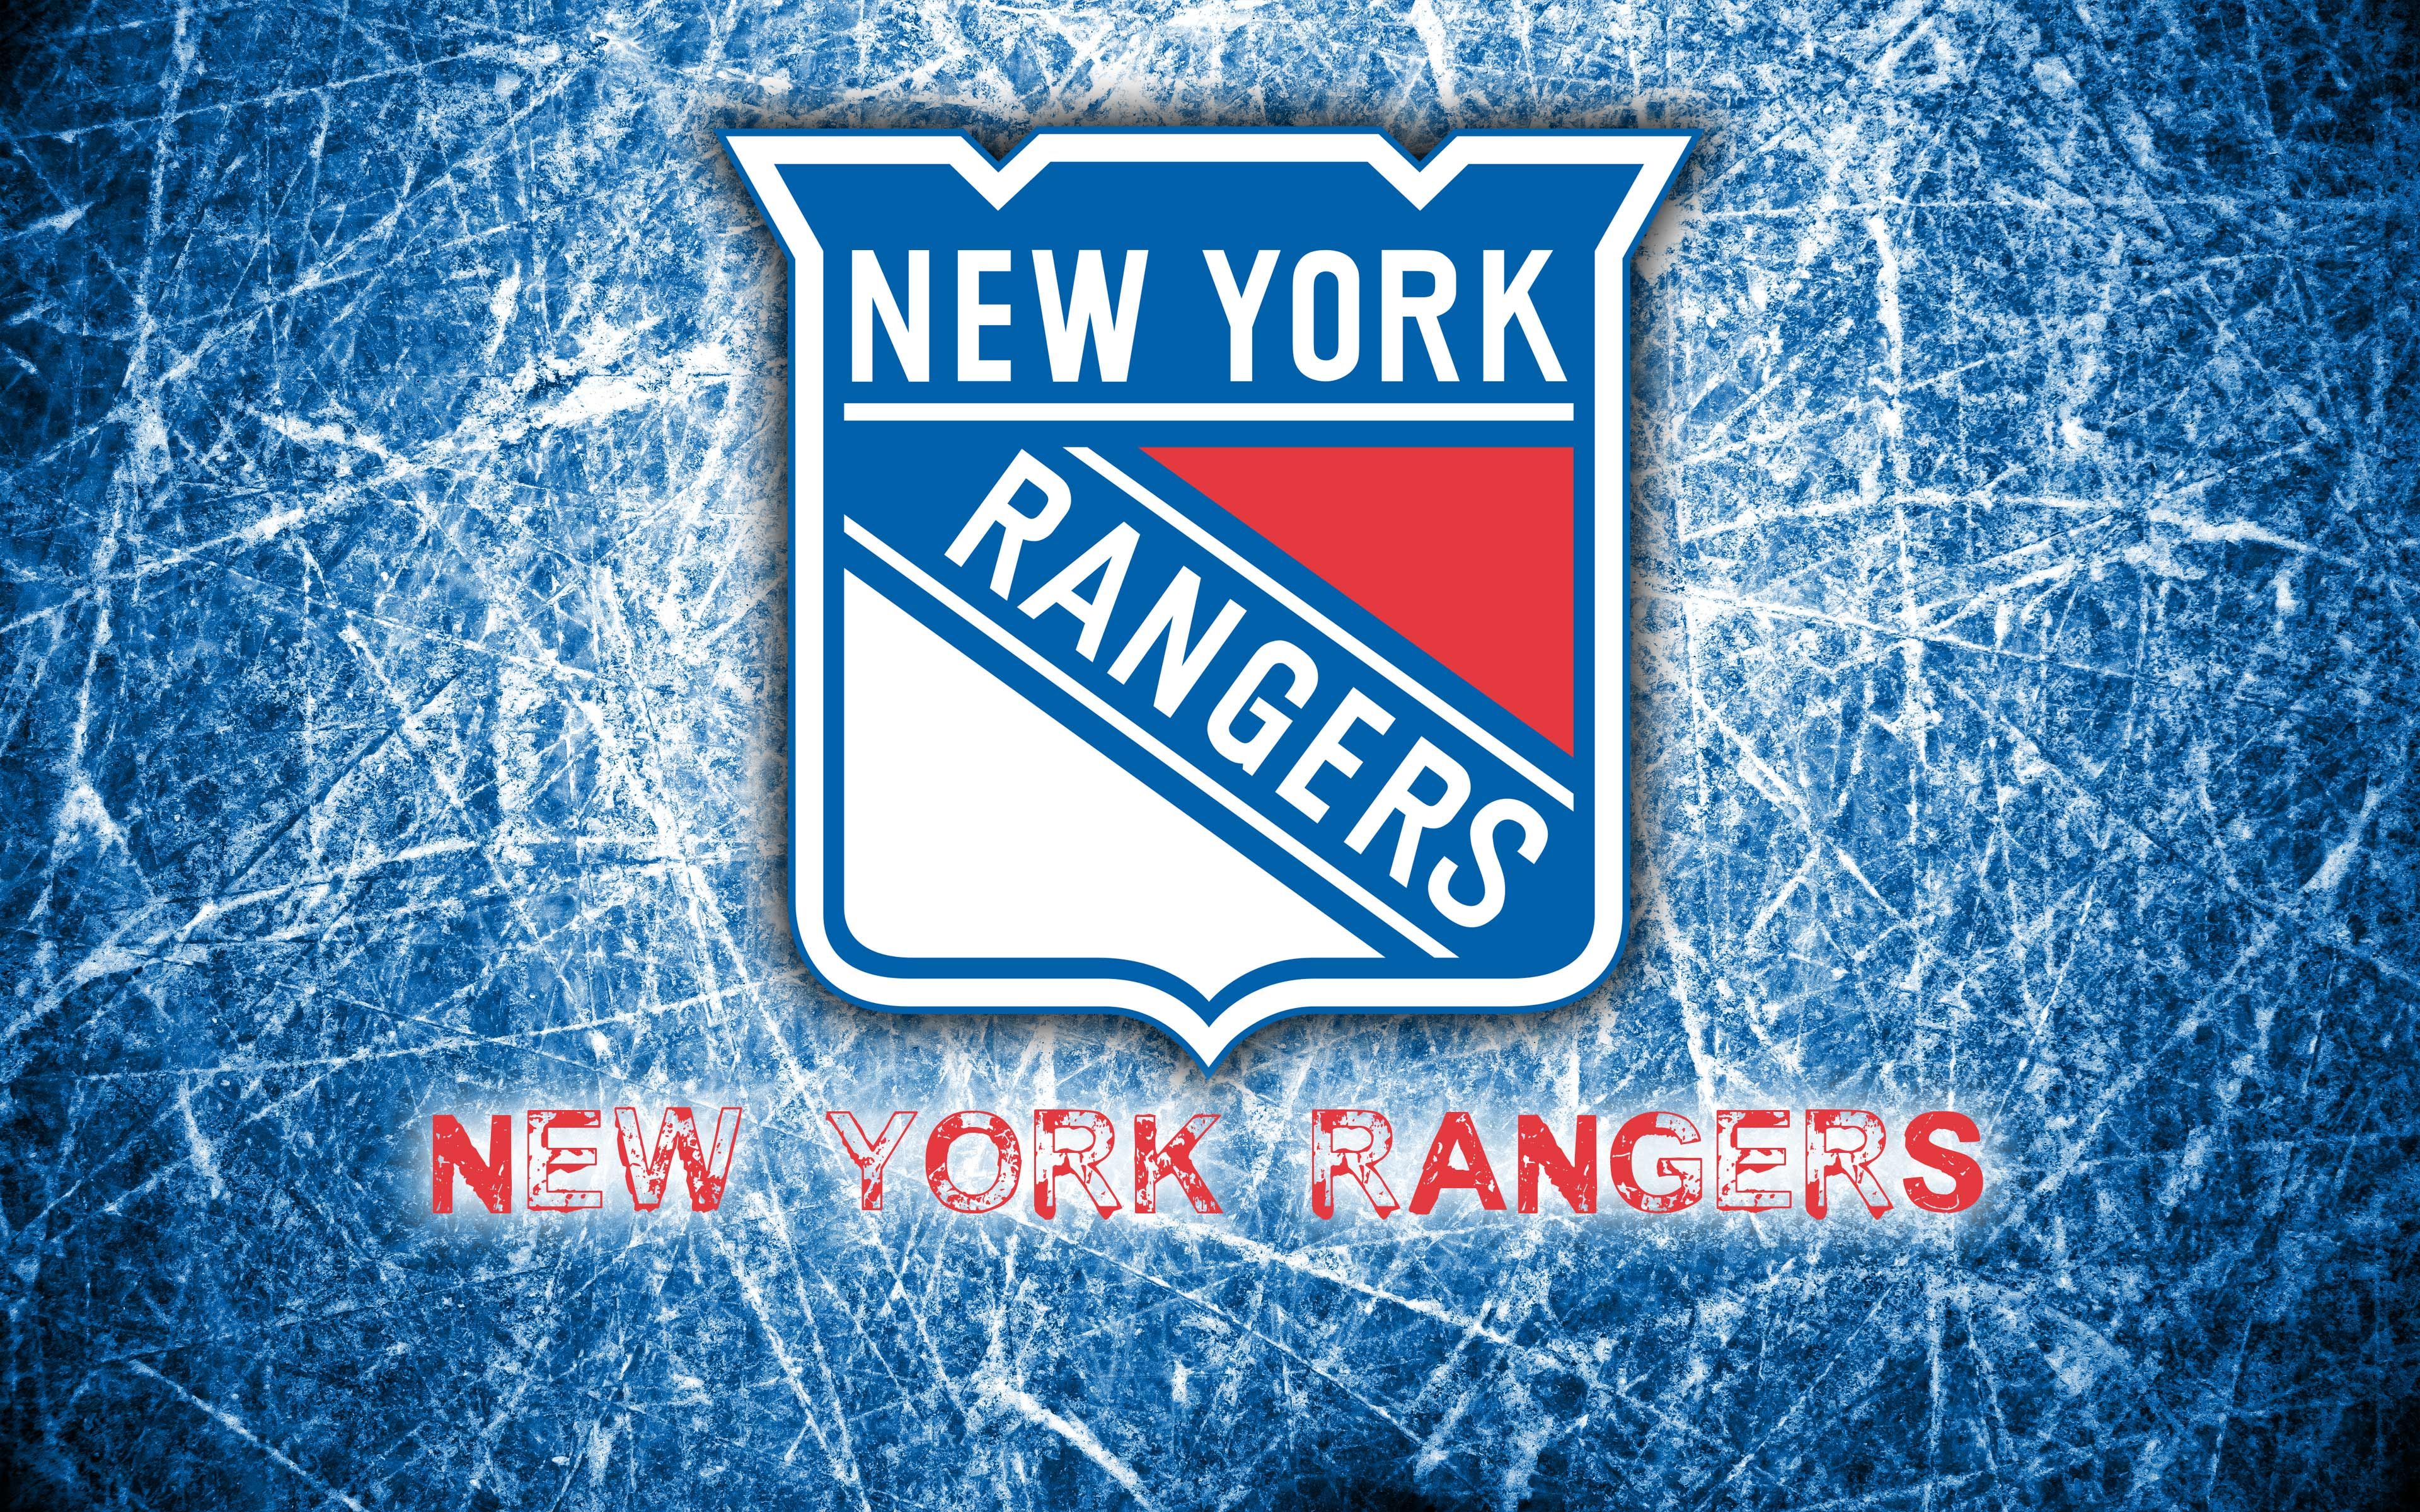 New York Rangers Wallpaper Collection For Free Download New york